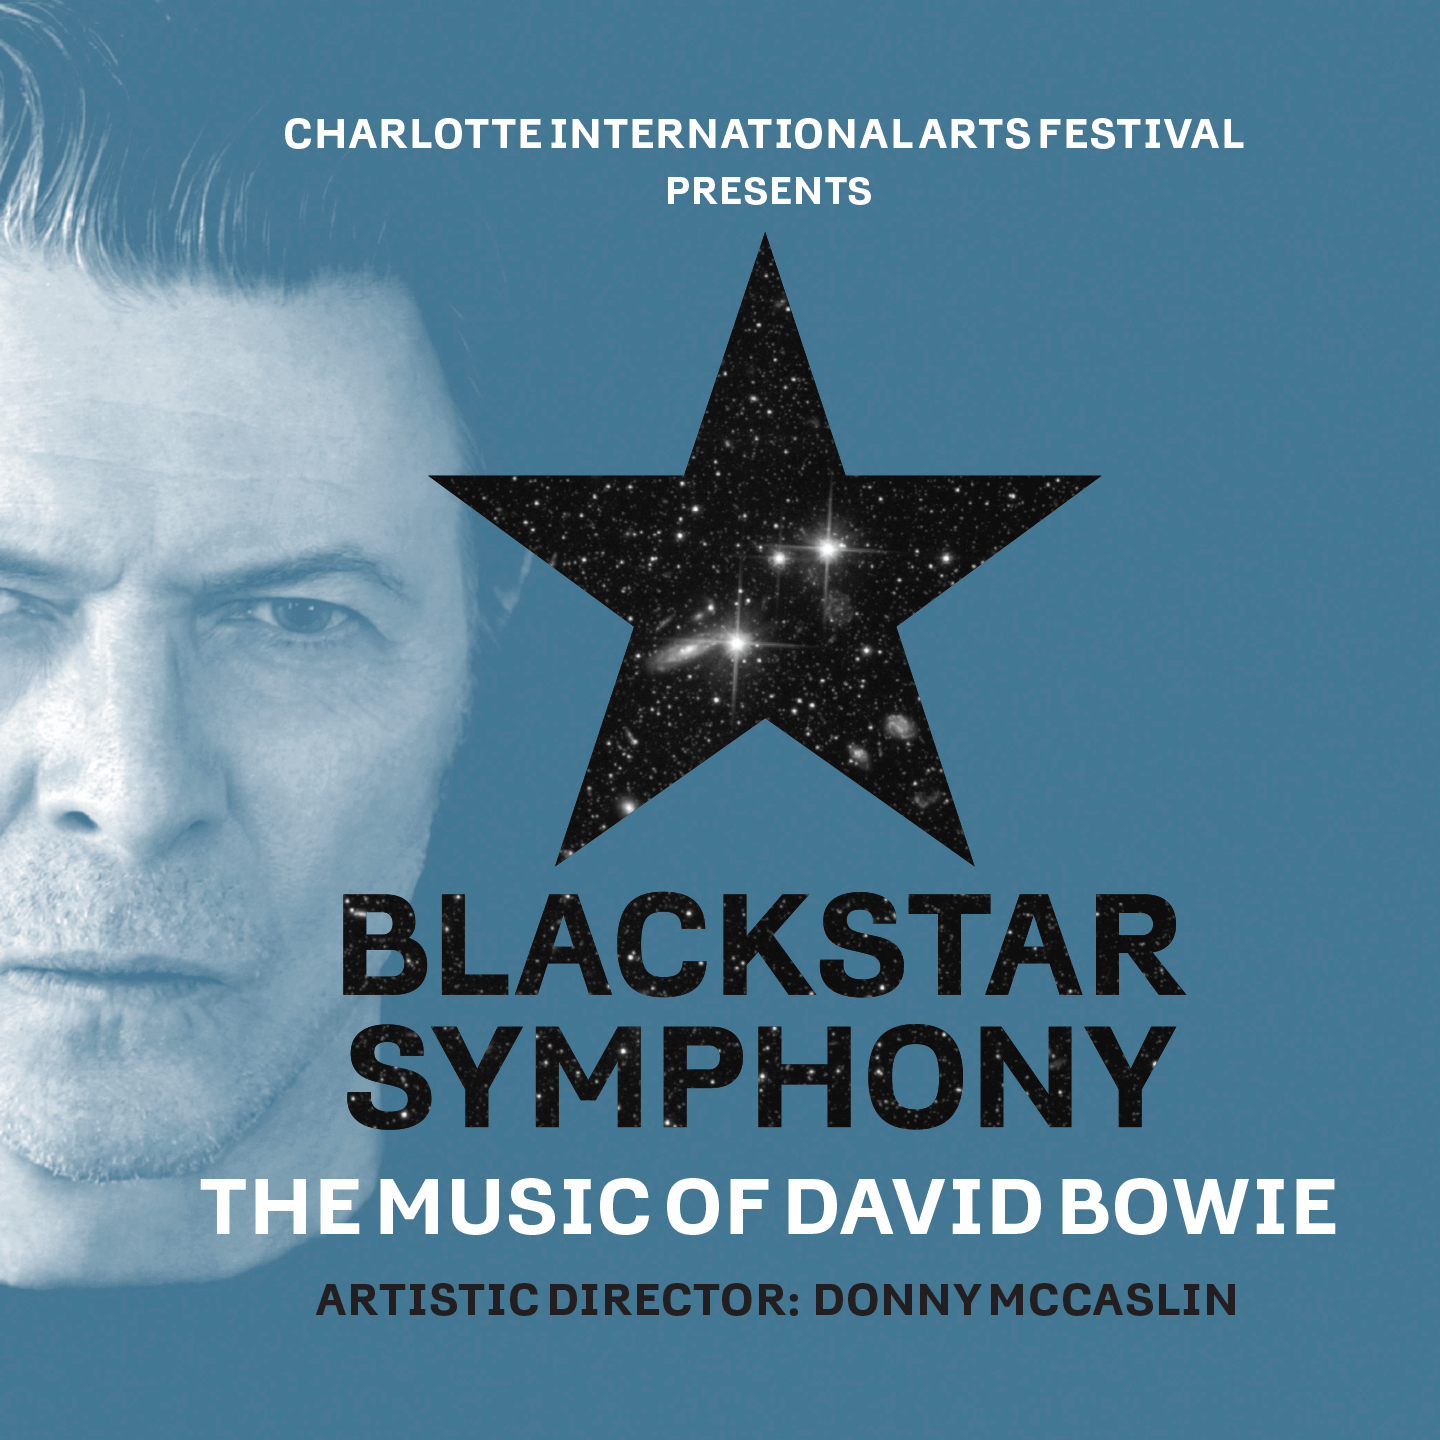 More Info for BLACKSTAR SYMPHONY Artistic Director Donny McCaslin, along with The Charlotte Symphony Orchestra, David Bowie collaborators and John Cameron Mitchell bring Bowie’s final album, BLACKSTAR, to life